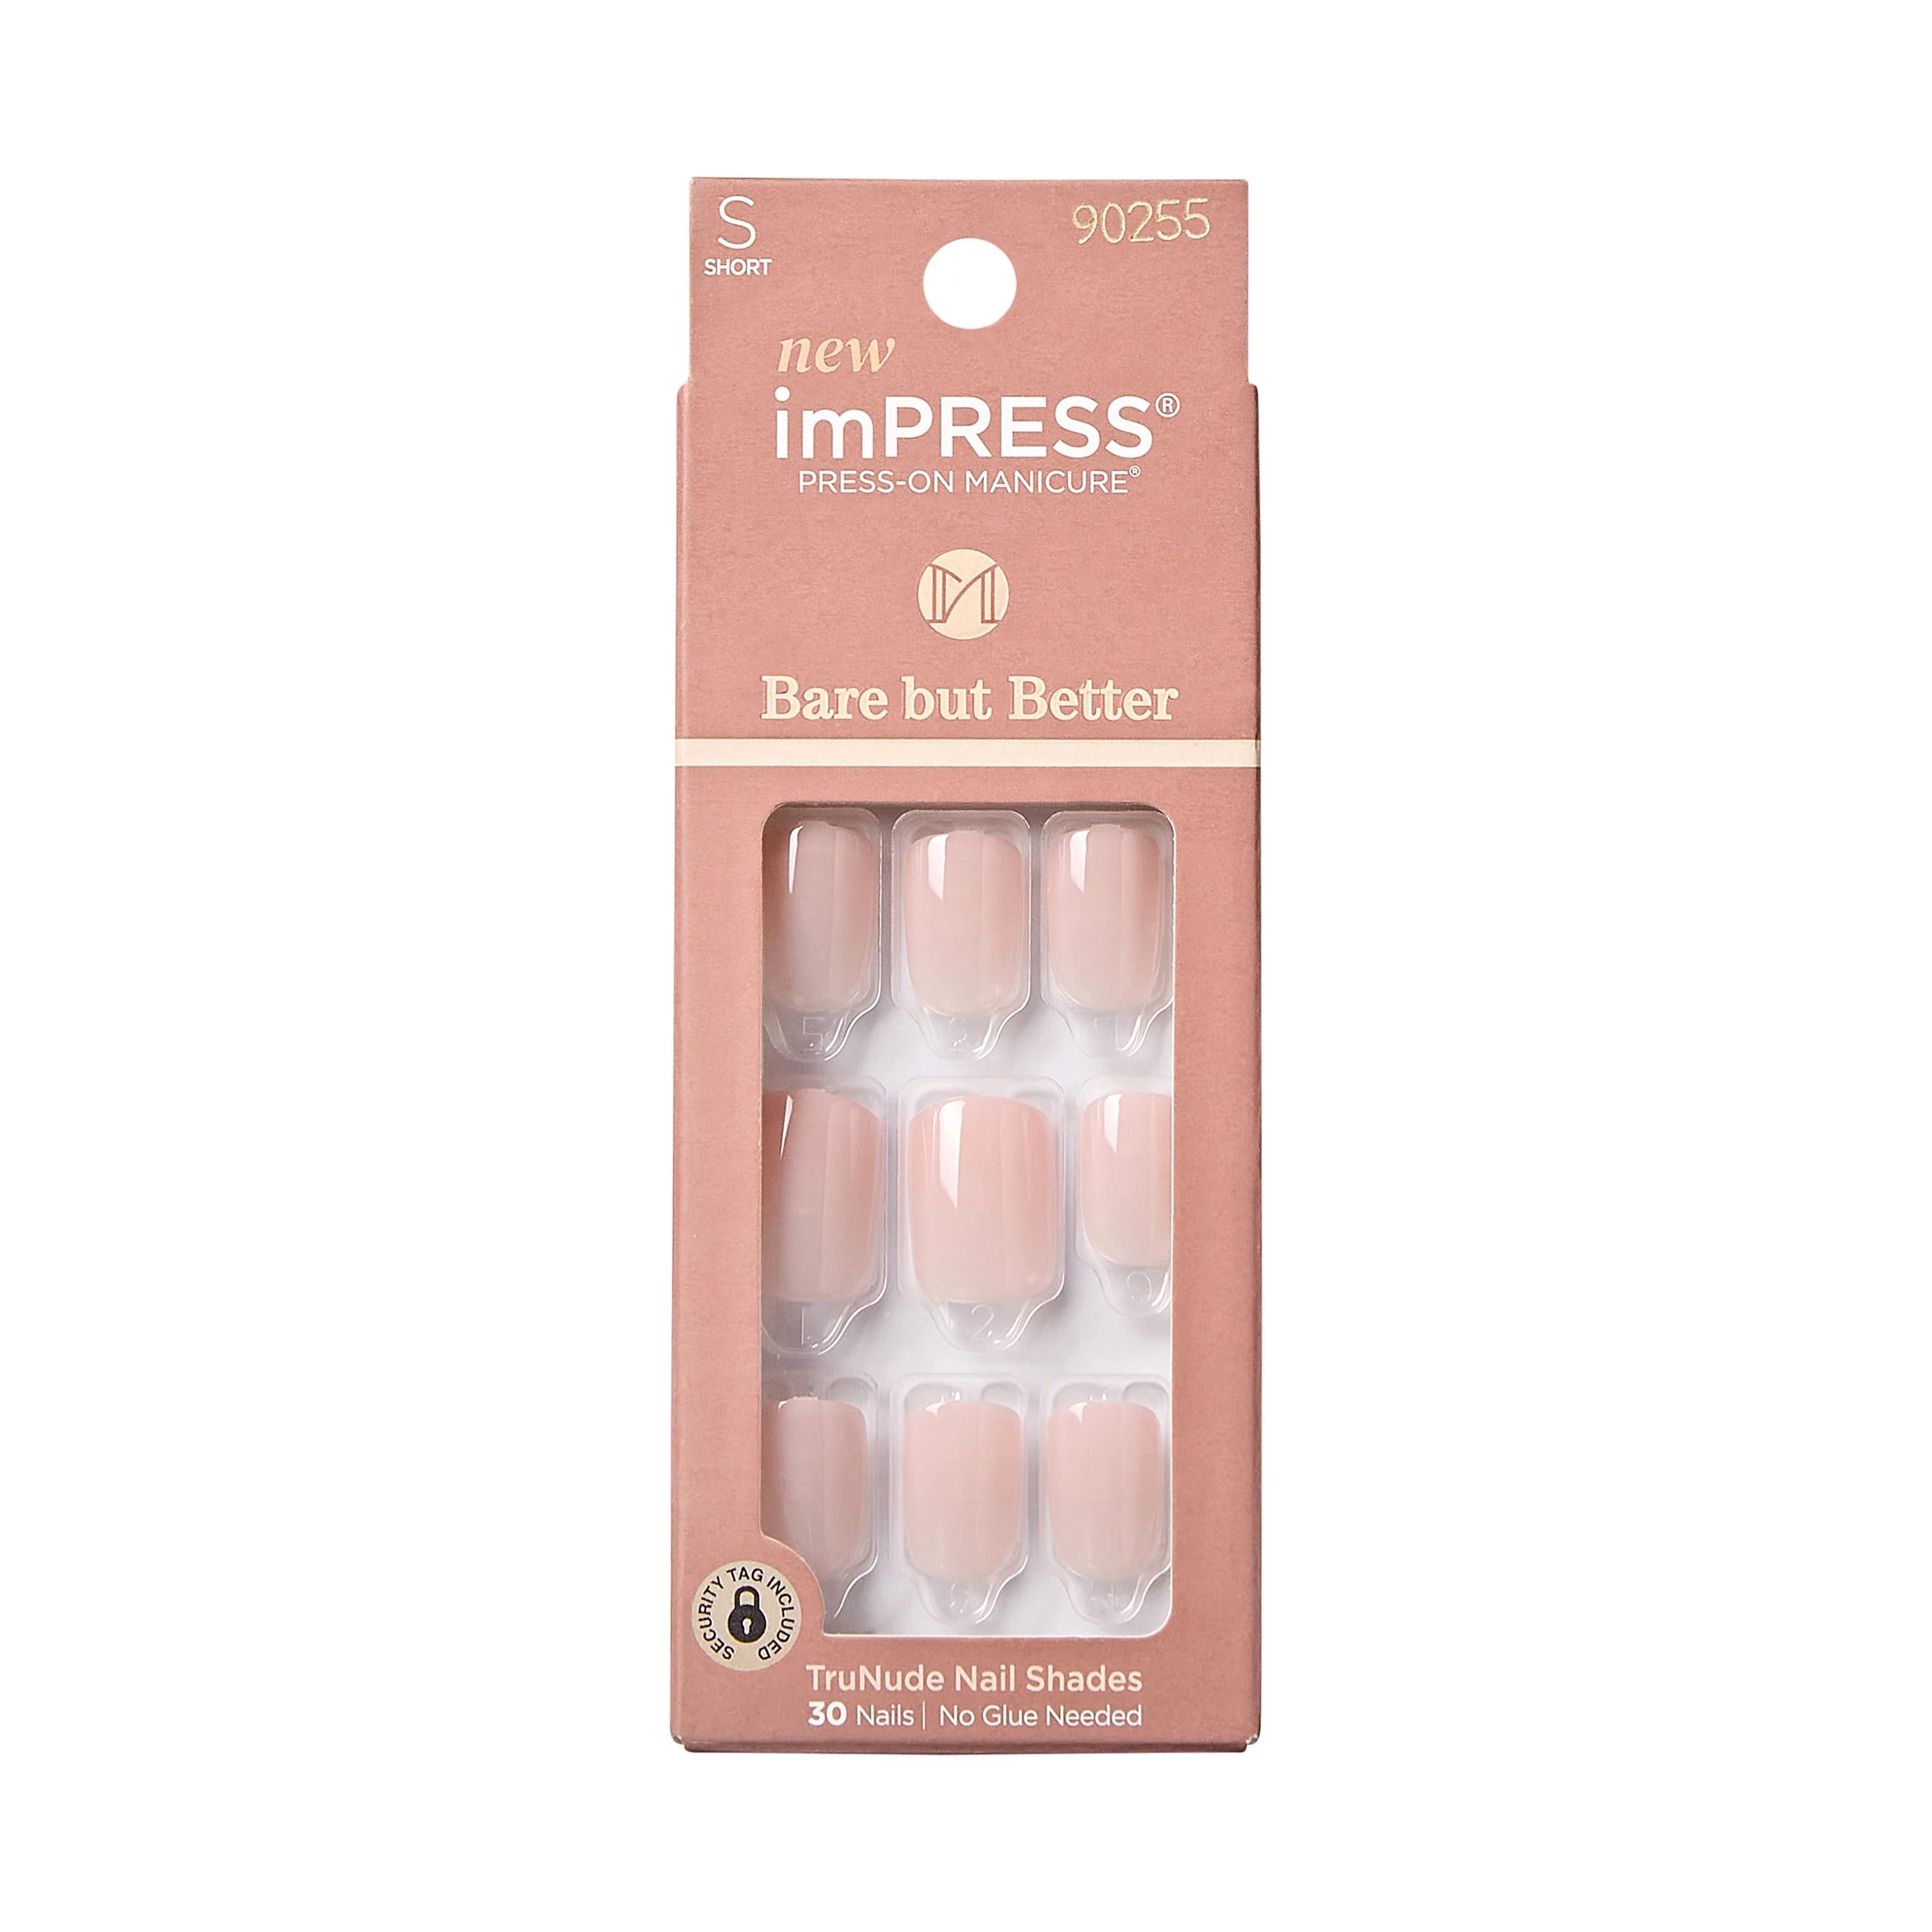 KISS imPRESS Bare but better Short Square Gel Press-On Nails, Glossy Light Pink, 30 Pieces | Walmart (US)